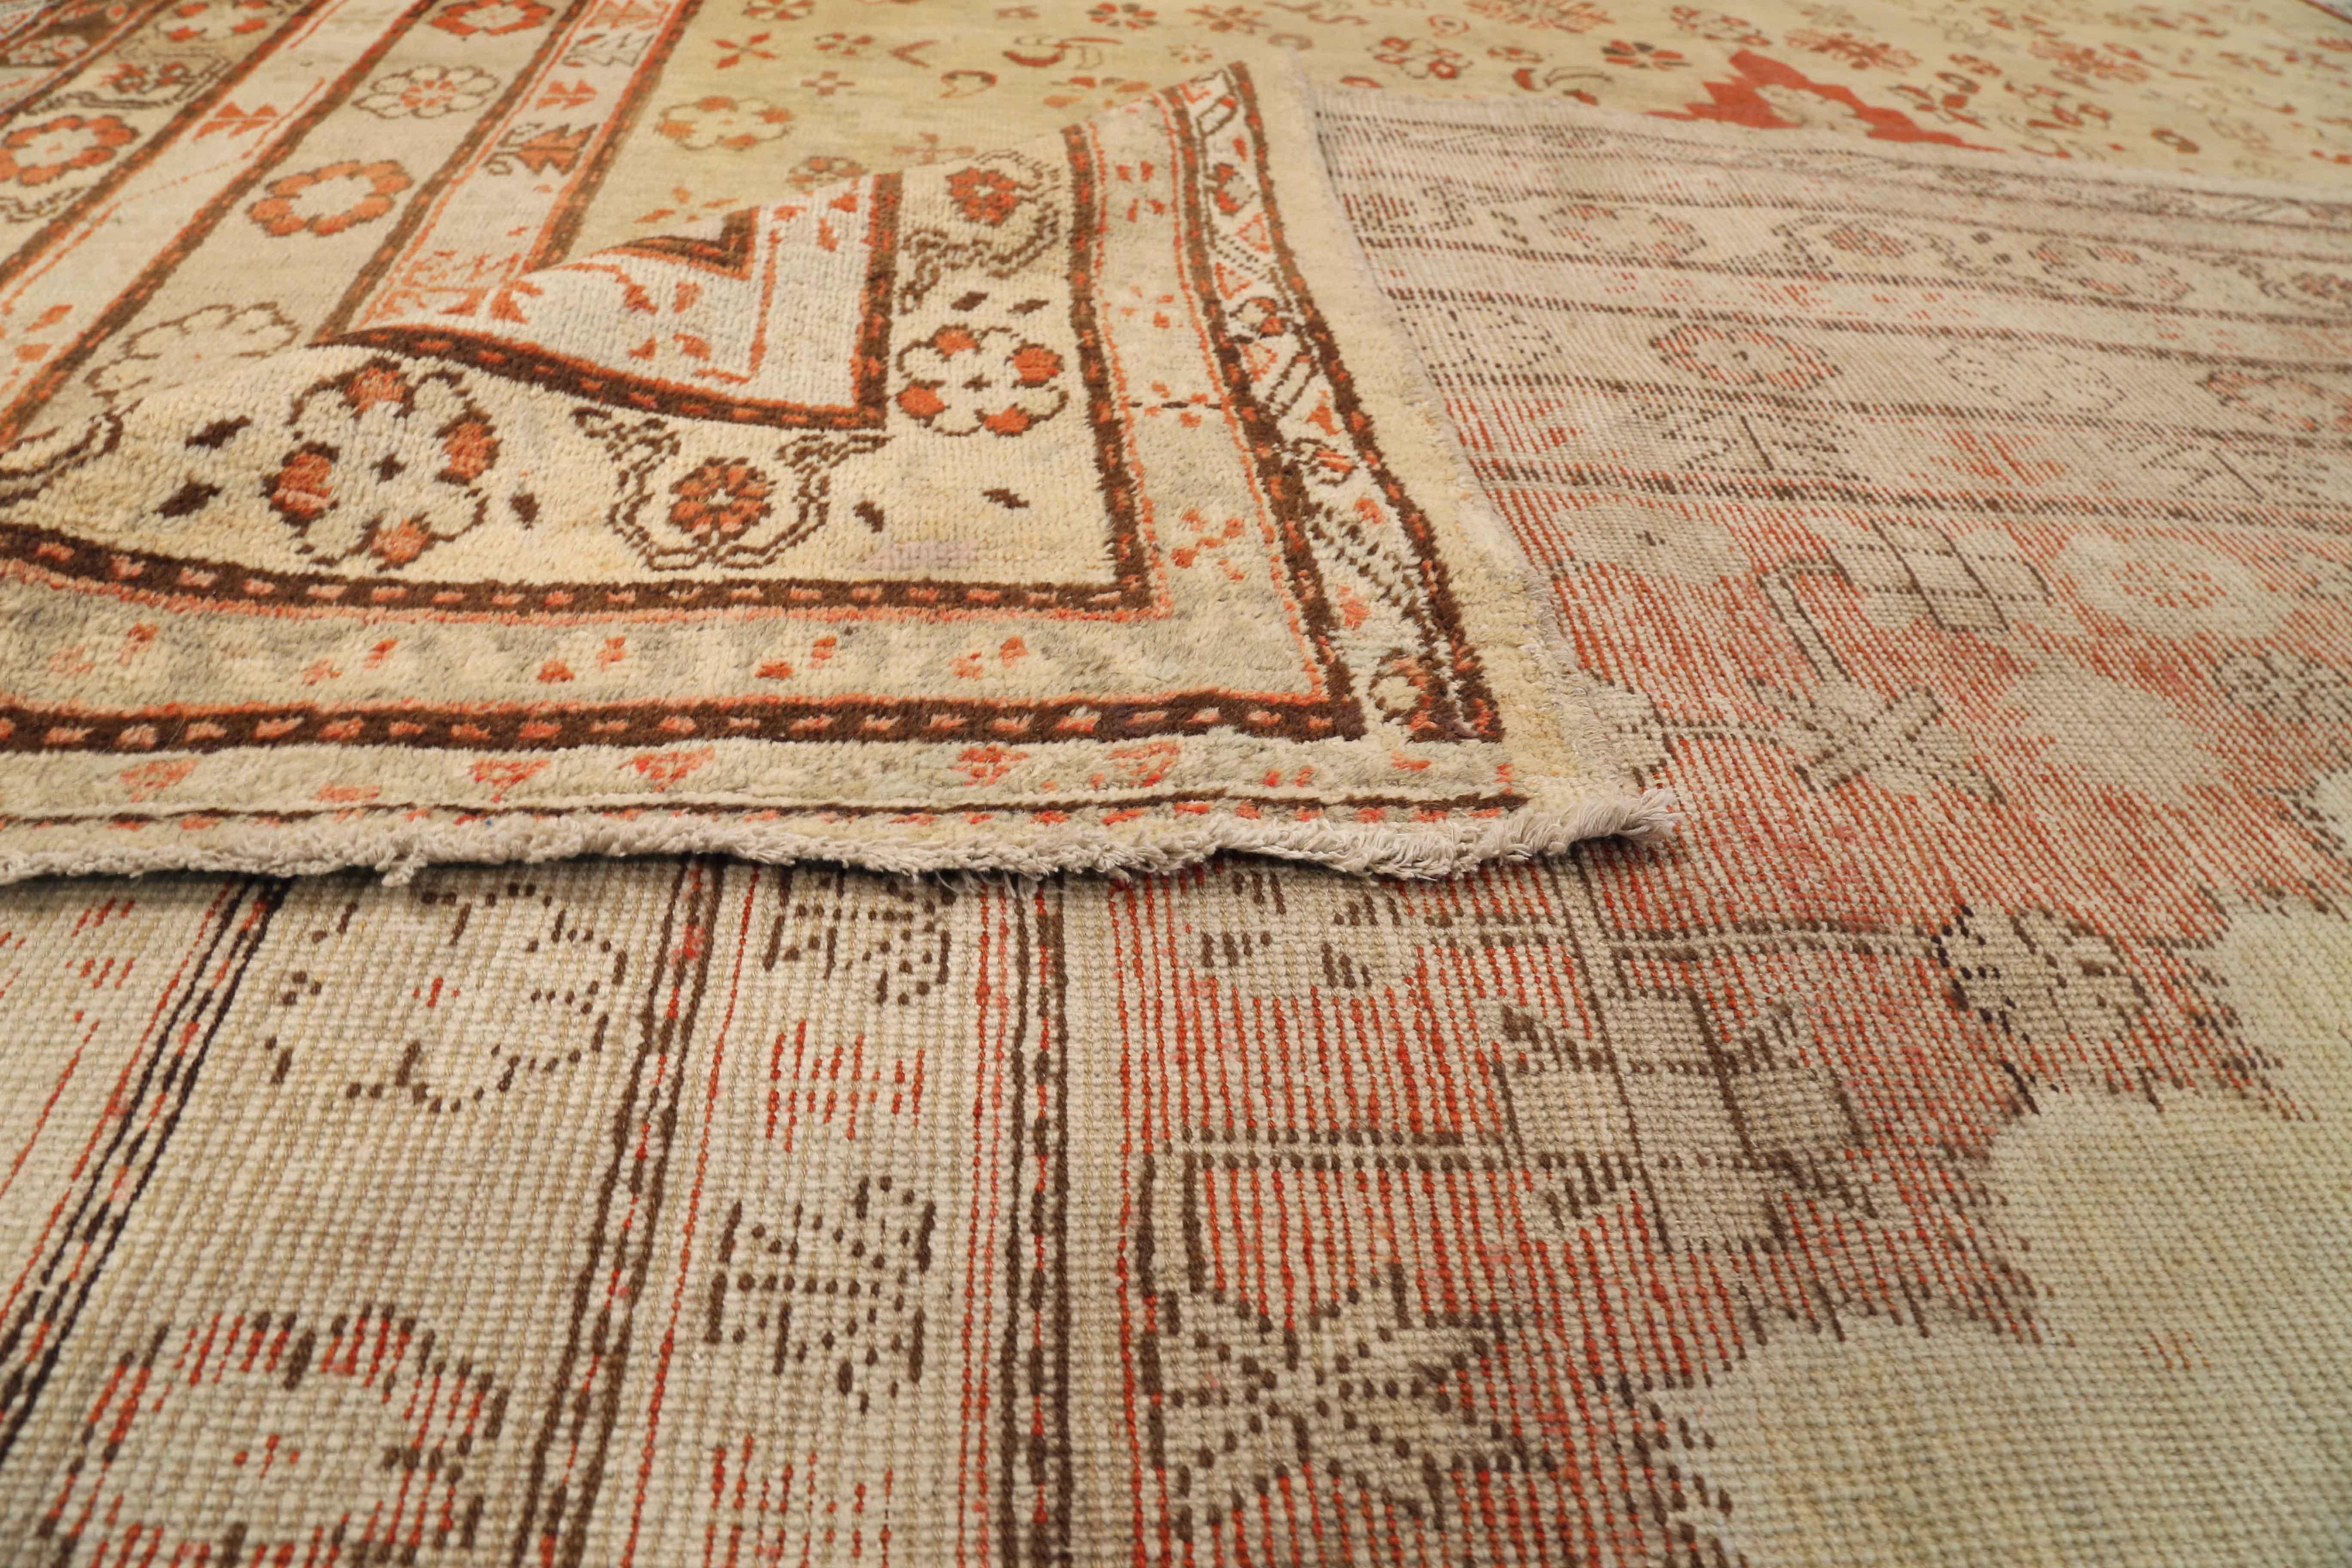 Antique Central Asian rug made of exquisite wool and the finest vegetable dyes. It exhibits a centerfield with a unique geometric design enclosed by several borders of nature-inspired and floral patterns. It’s a recurring theme in traditional rugs